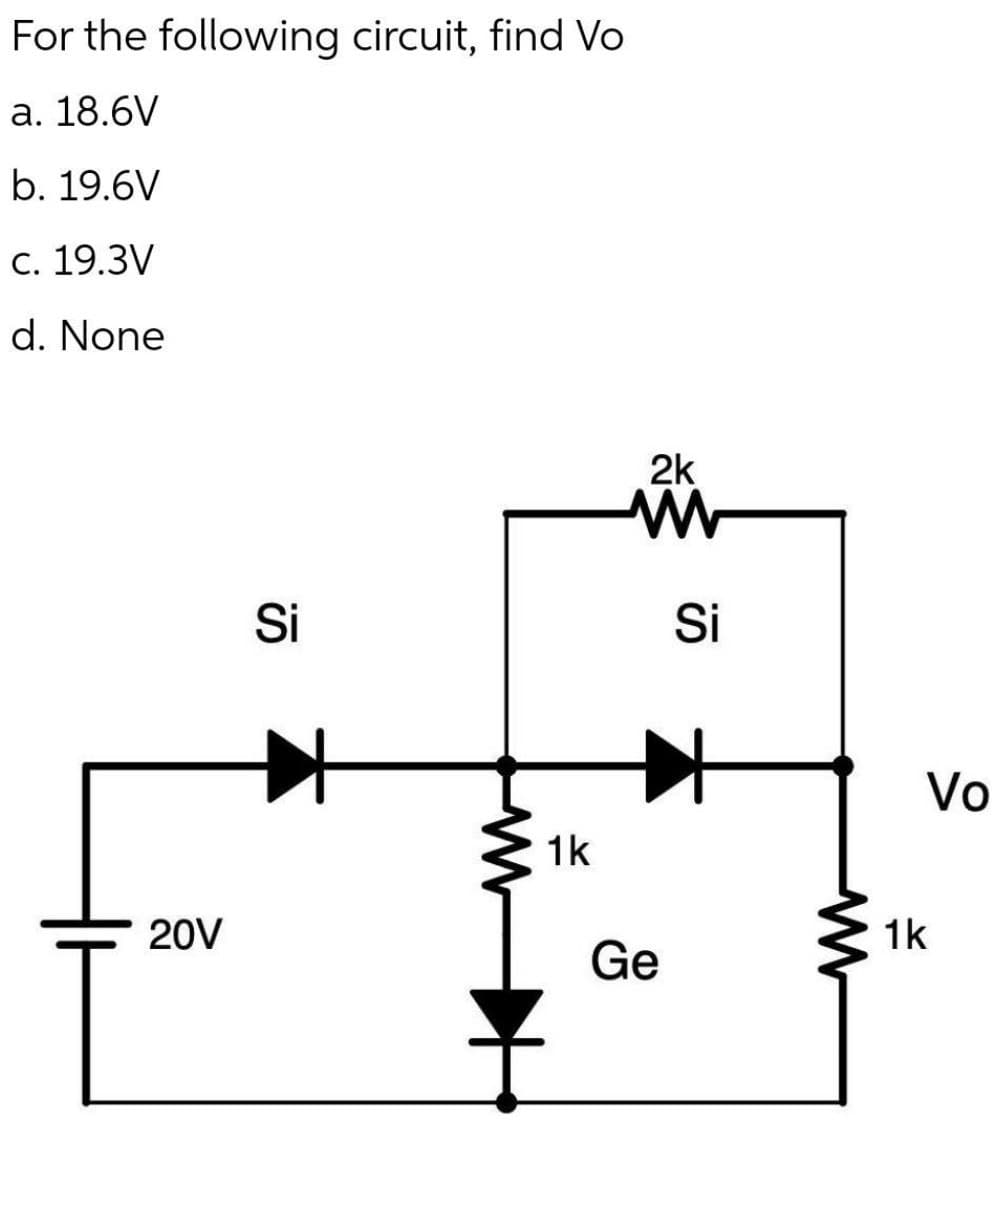 For the following circuit, find Vo
a. 18.6V
b. 19.6V
c. 19.3V
d. None
20V
Si
1k
2k
ww
Si
Ge
www
Vo
1k